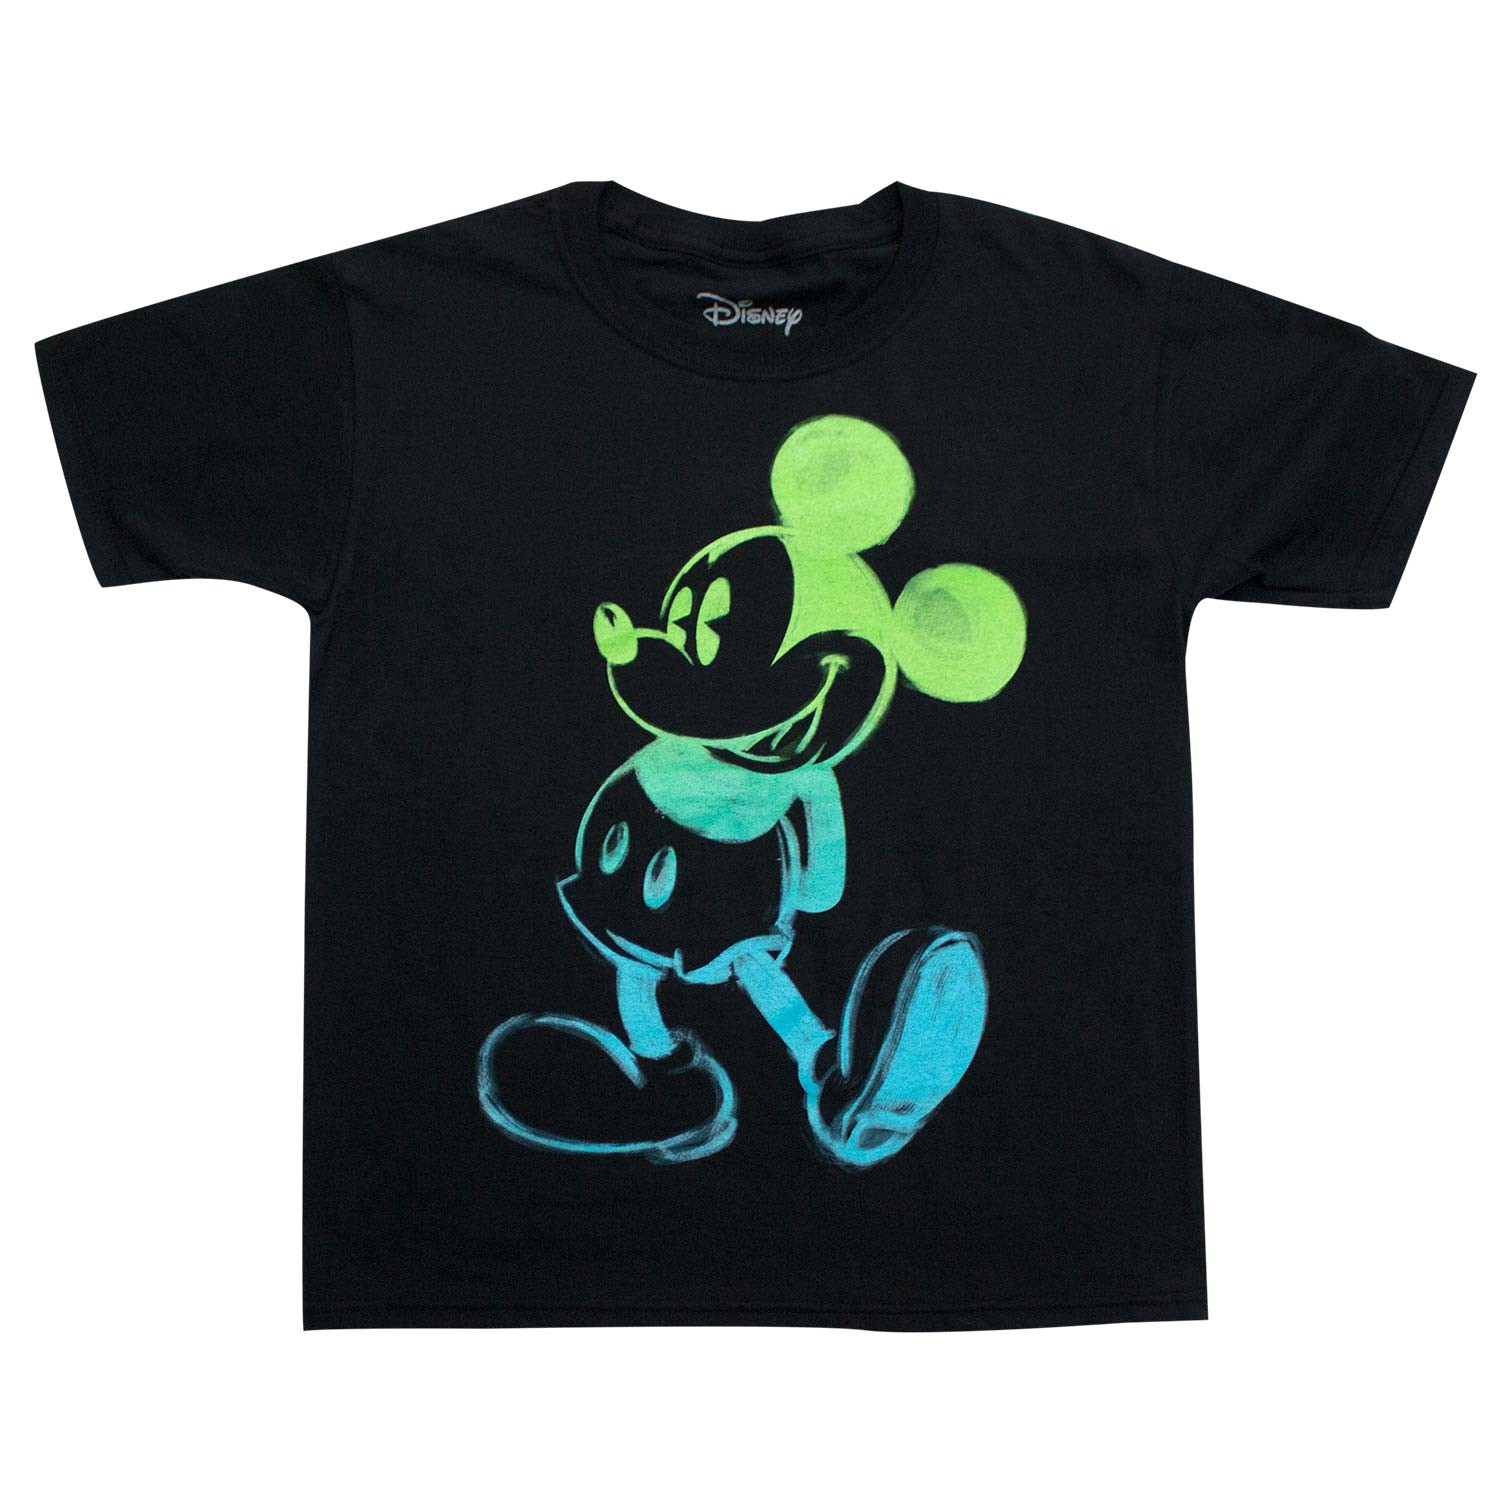 Mickey Mouse Glow In The Dark Youth Boys Black Tee Shirt